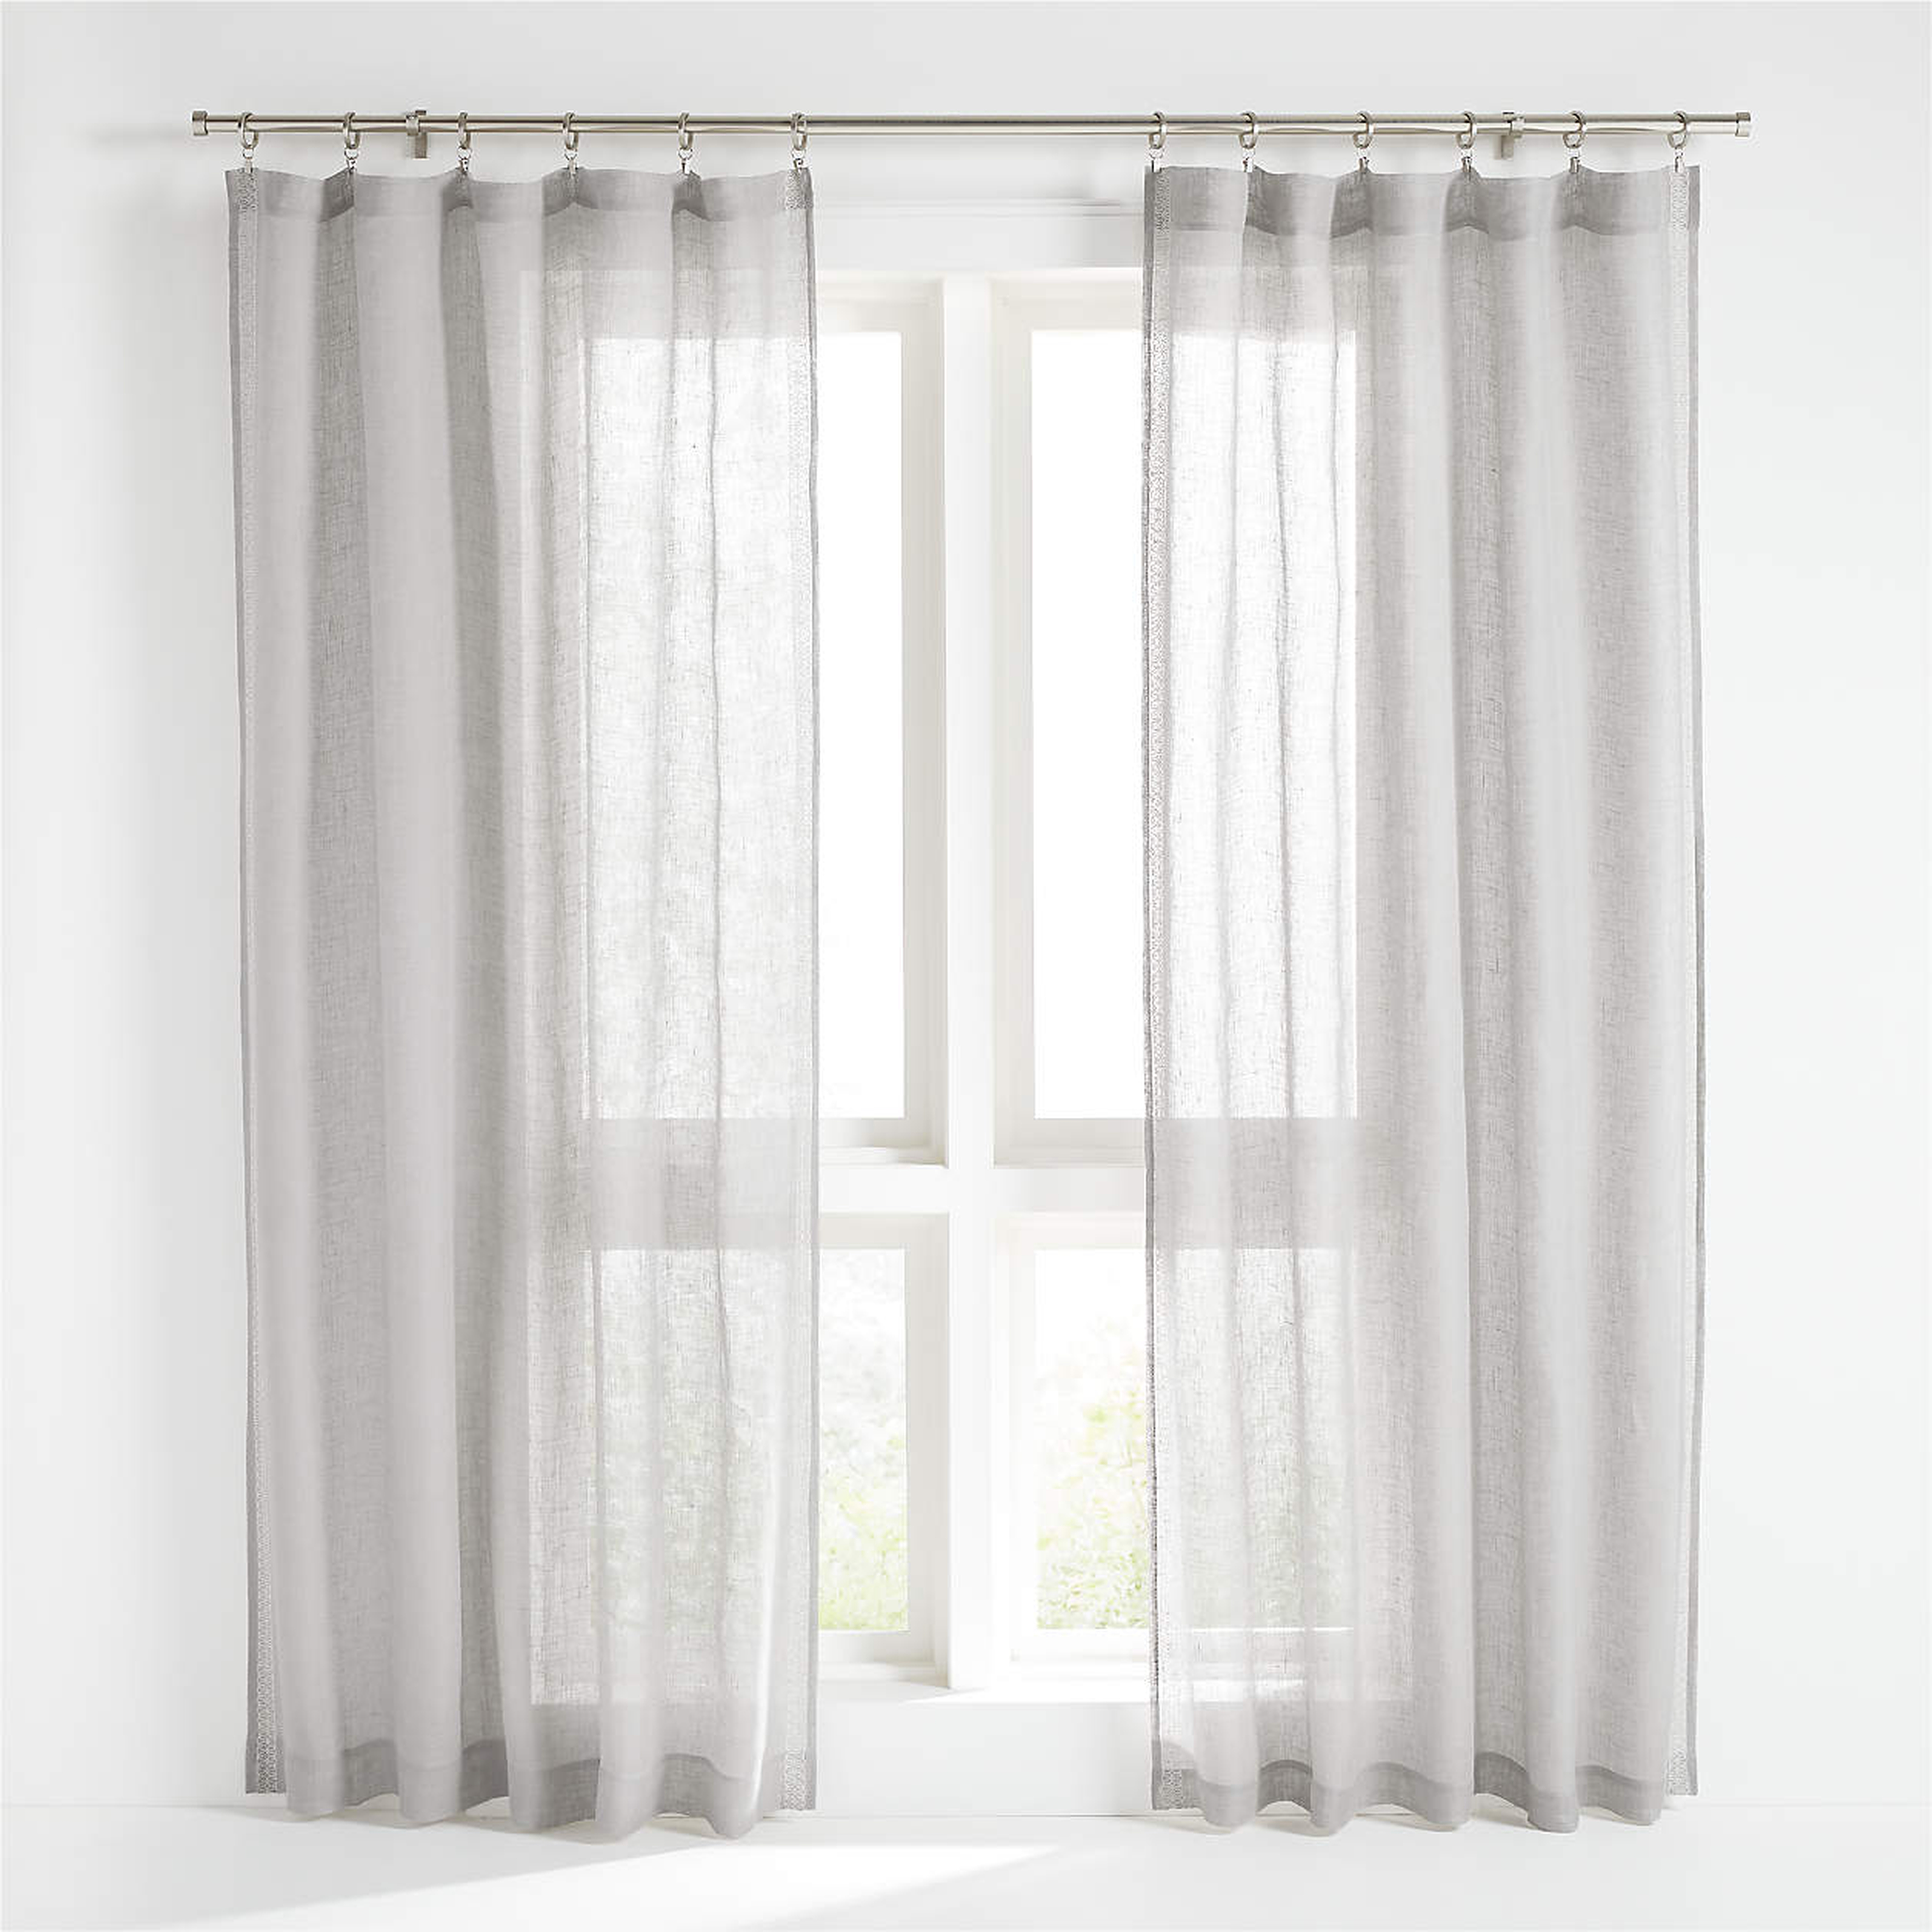 Linen Sheer Bordered Grey Curtain Panel, 52"x96" - Crate and Barrel